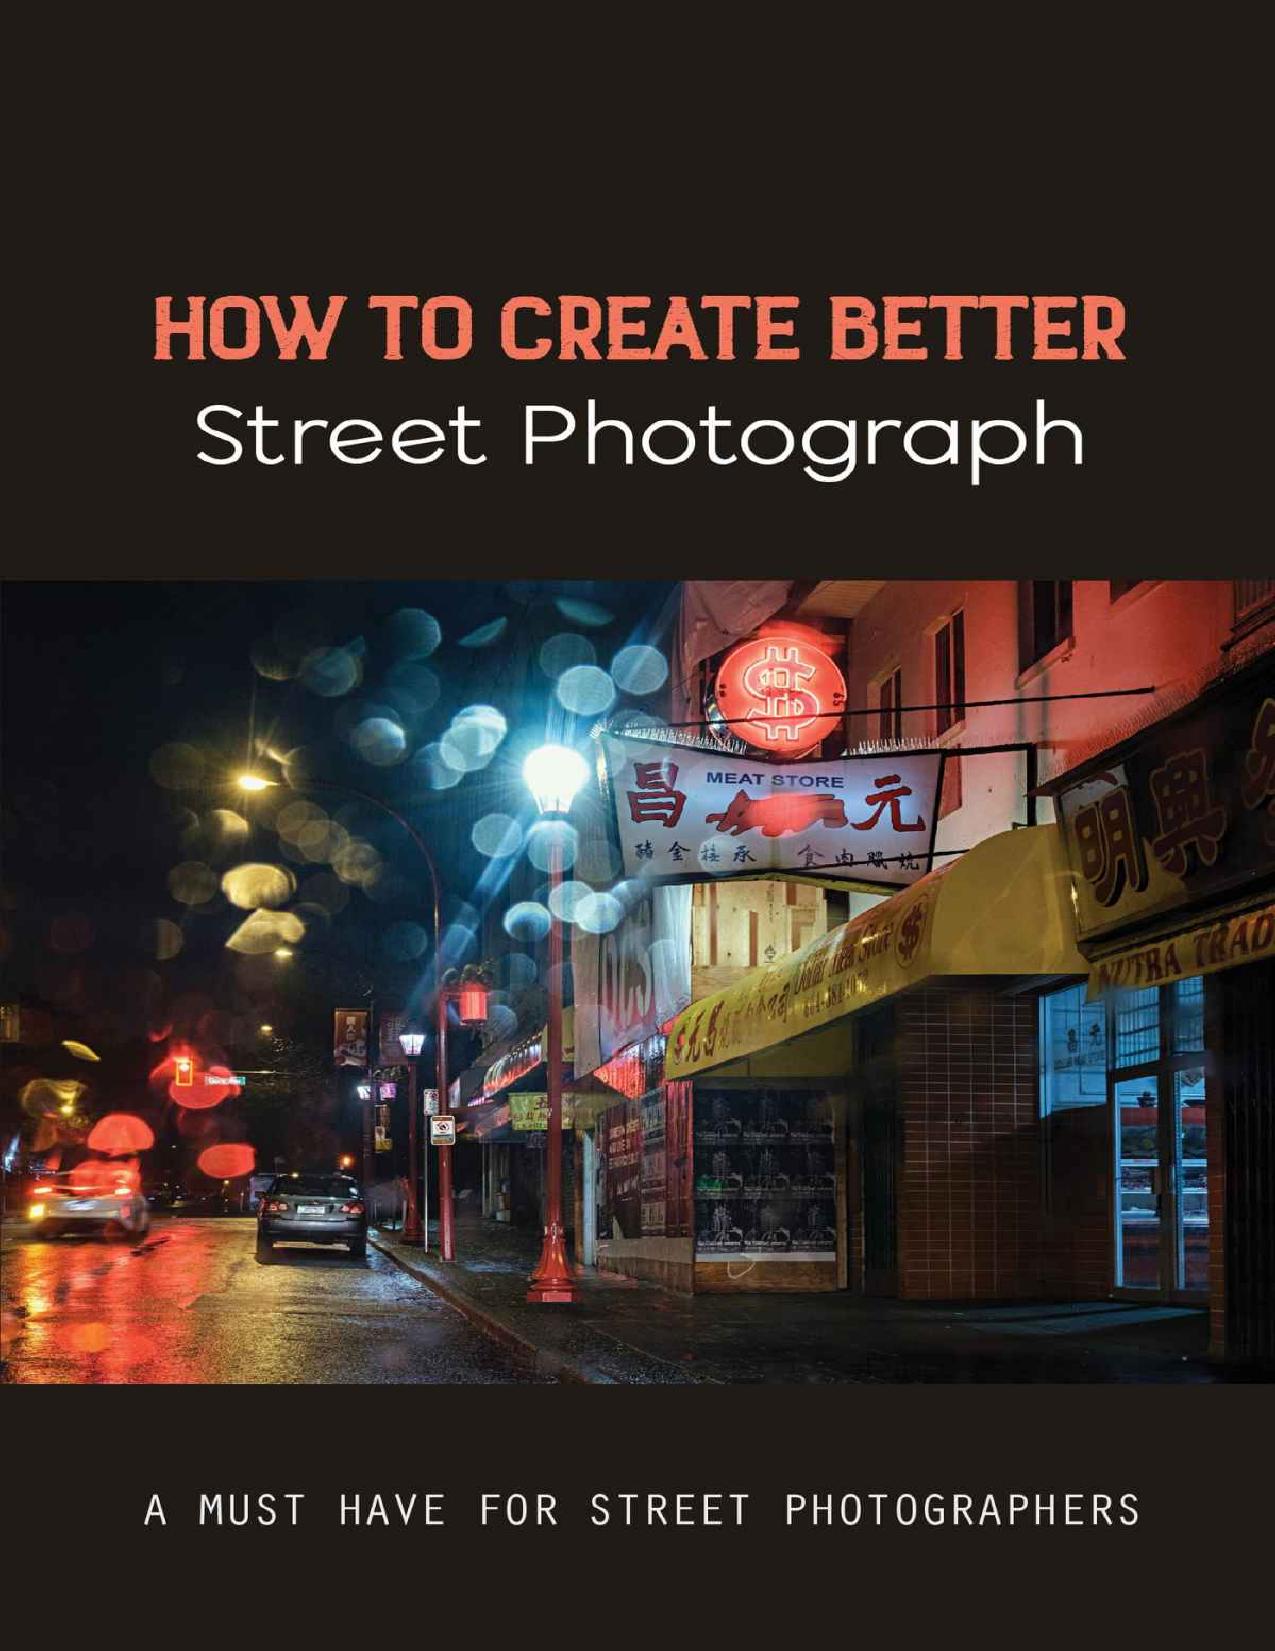 How To Create Better Street Photograph: A Must Have For Street Photographers by Kintzer Contessa